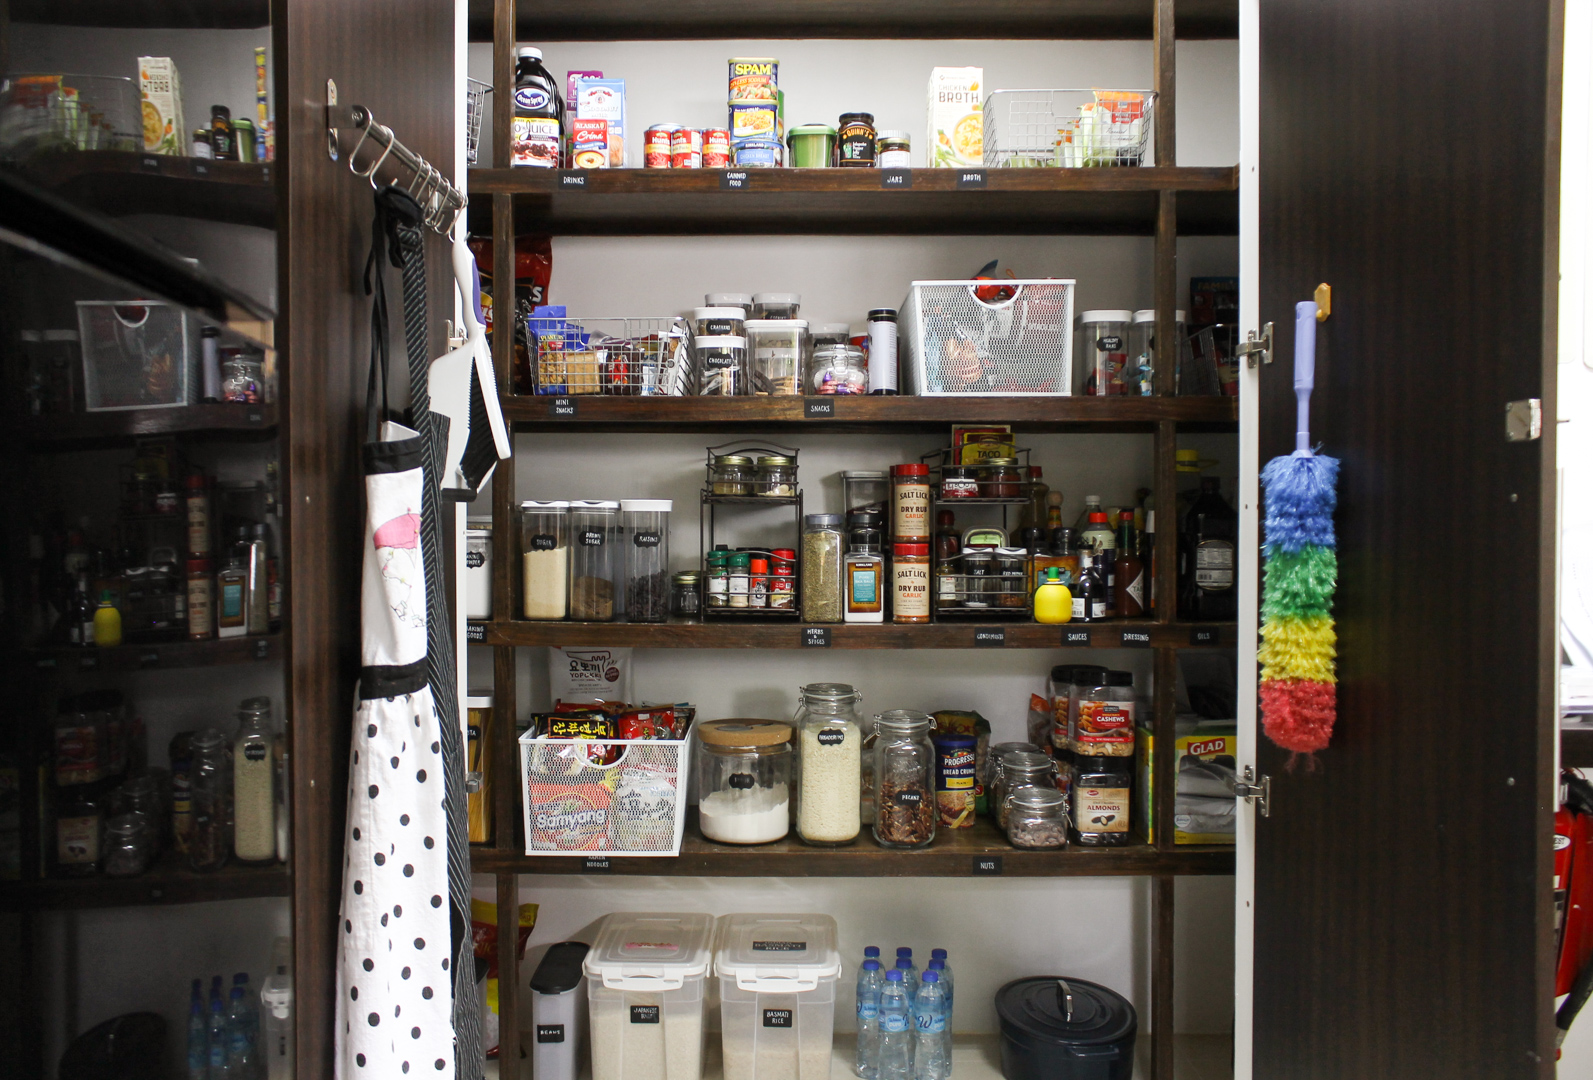 Pantry Organization with OXO Pop! - SG Style